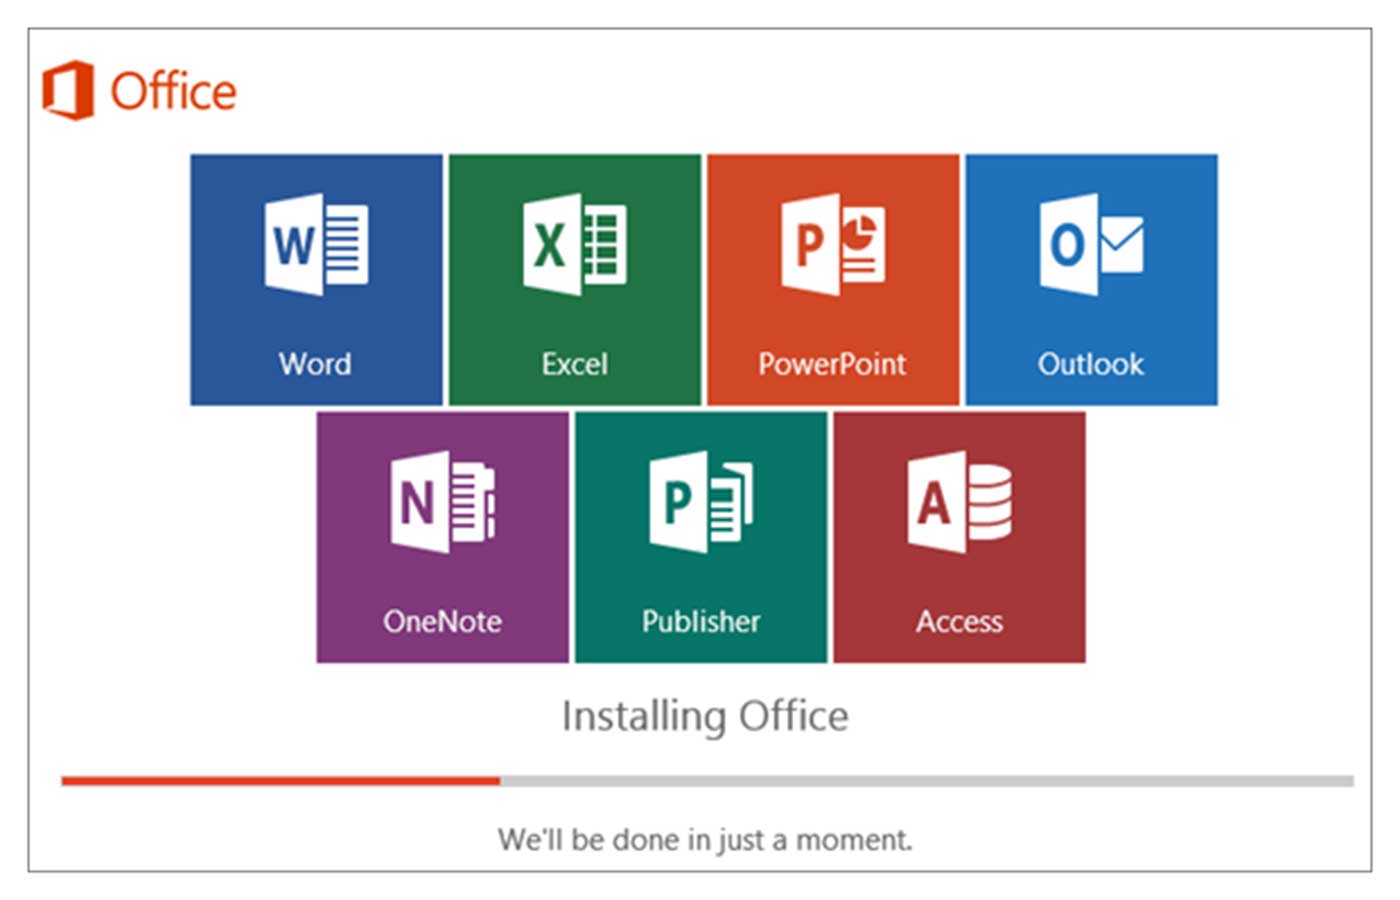 scottkrot.blogg.se How to use microsoft office suite